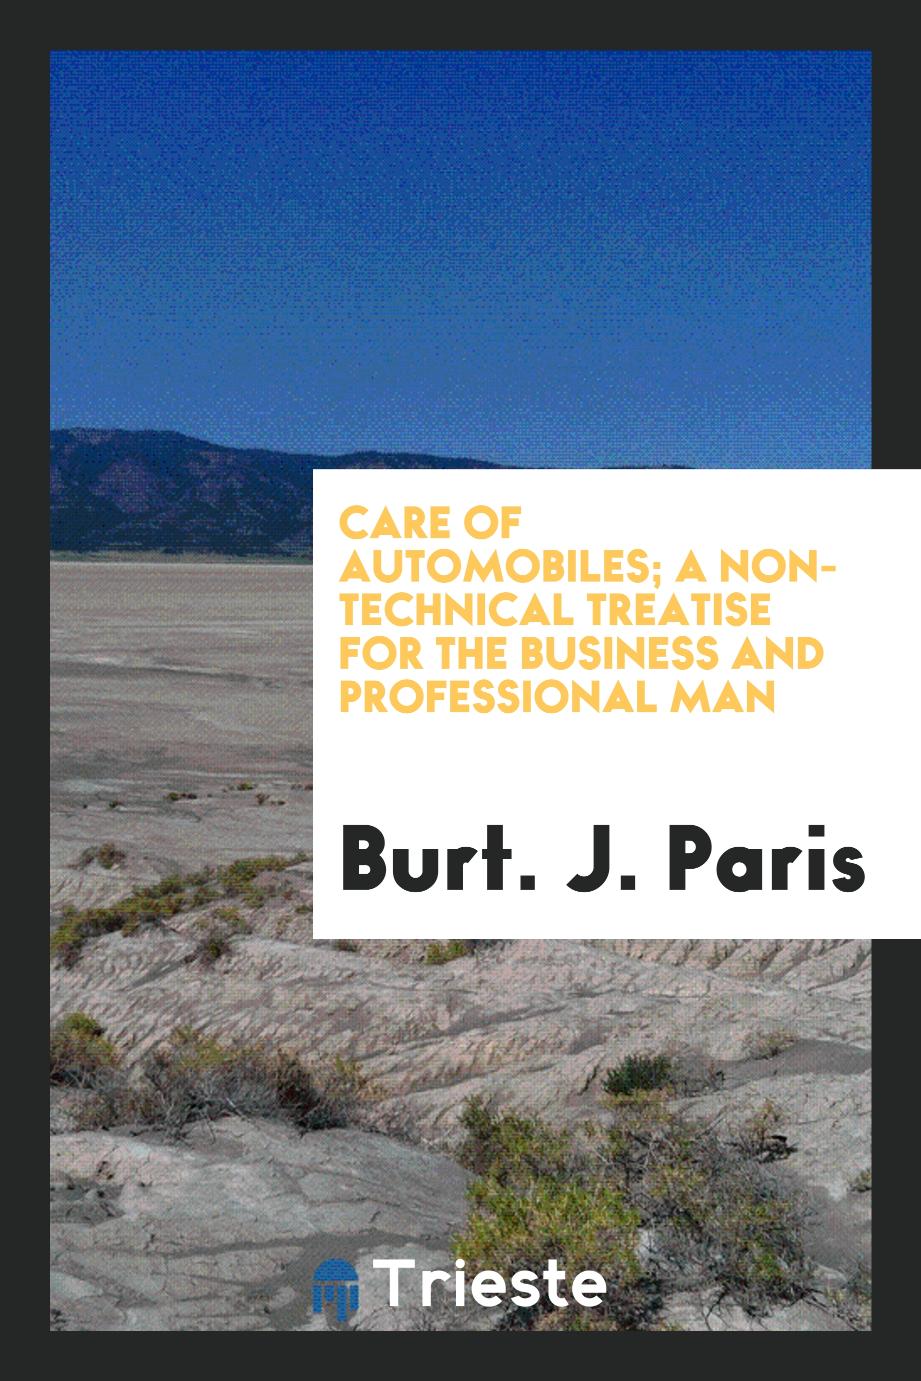 Care of Automobiles; a Non-technical Treatise for the Business and professional man